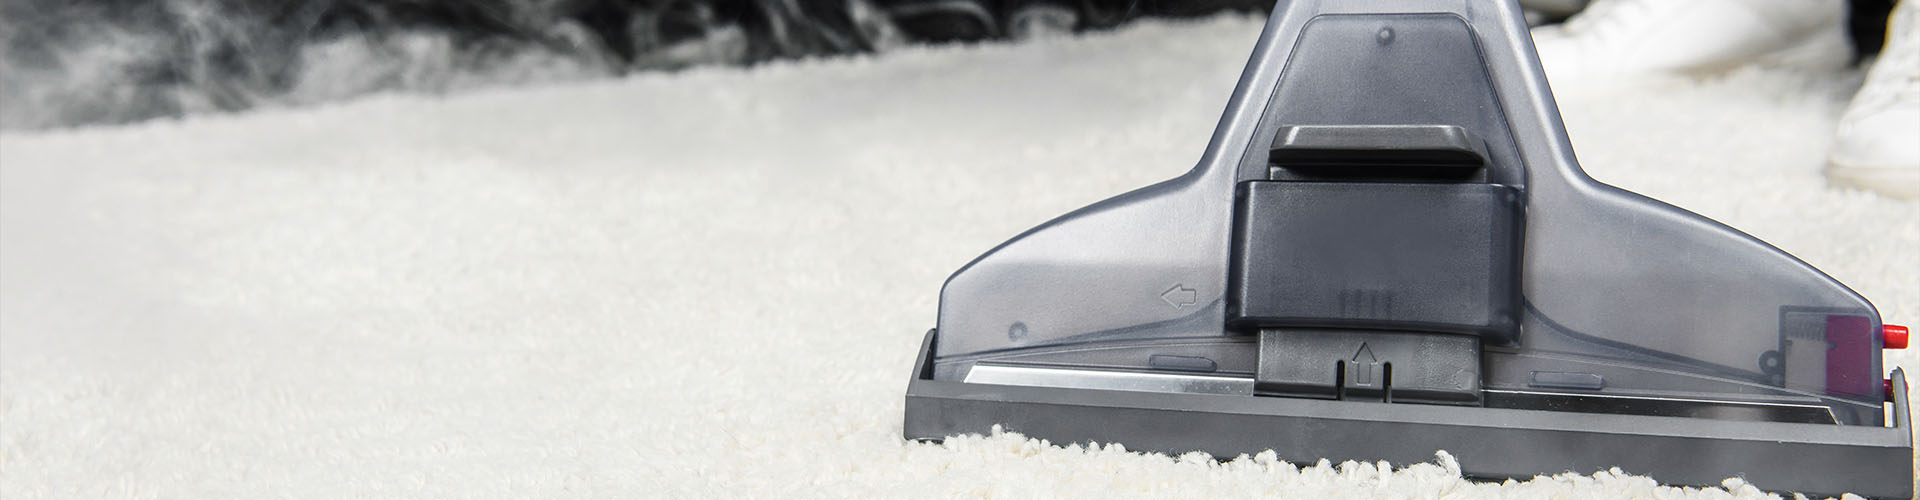 Common Carpet Cleaning Misconceptions Clarified